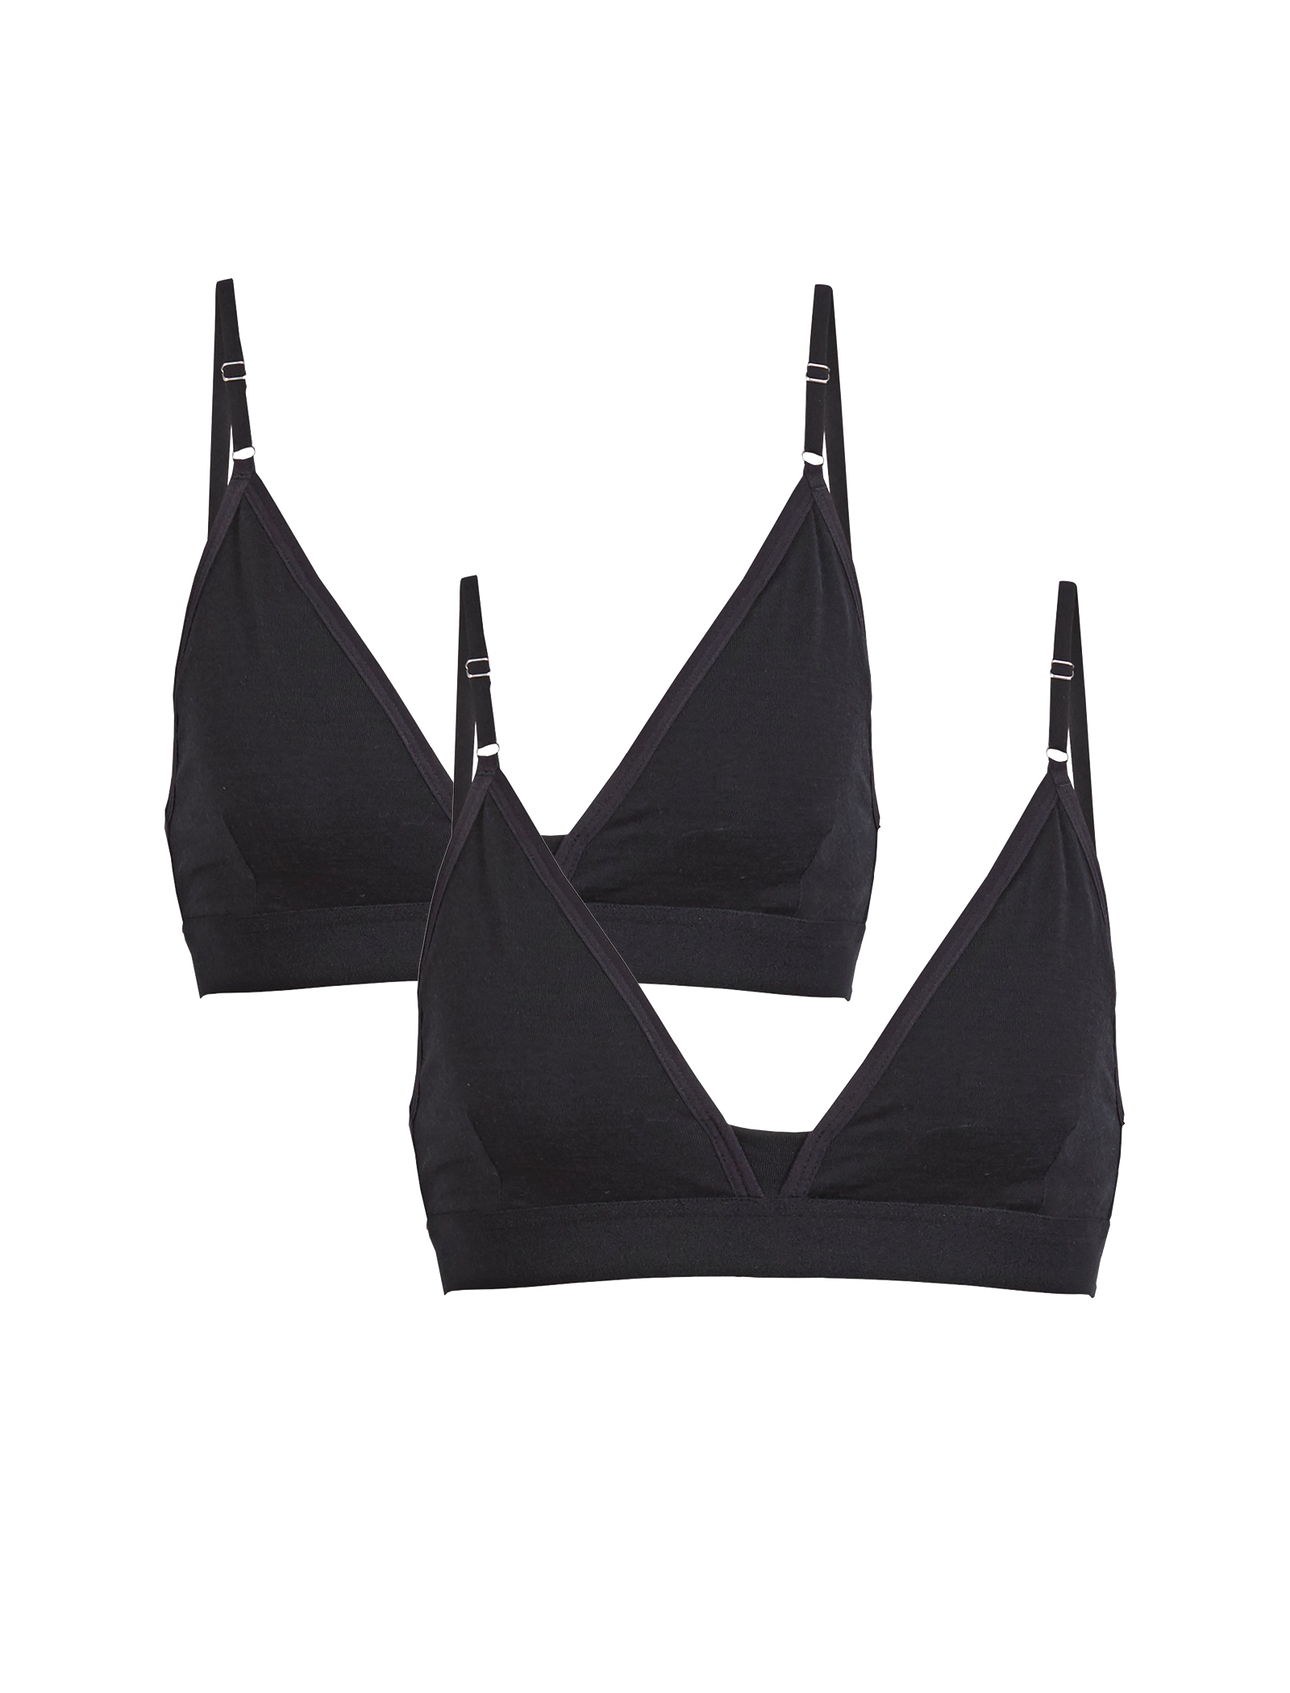 Womens Merino Siren Bra 2 Pack A sleek, modern-fit bra with our soft and stretchy corespun merino wool fabric, the Siren Bra is comfortable, supportive and breathable.